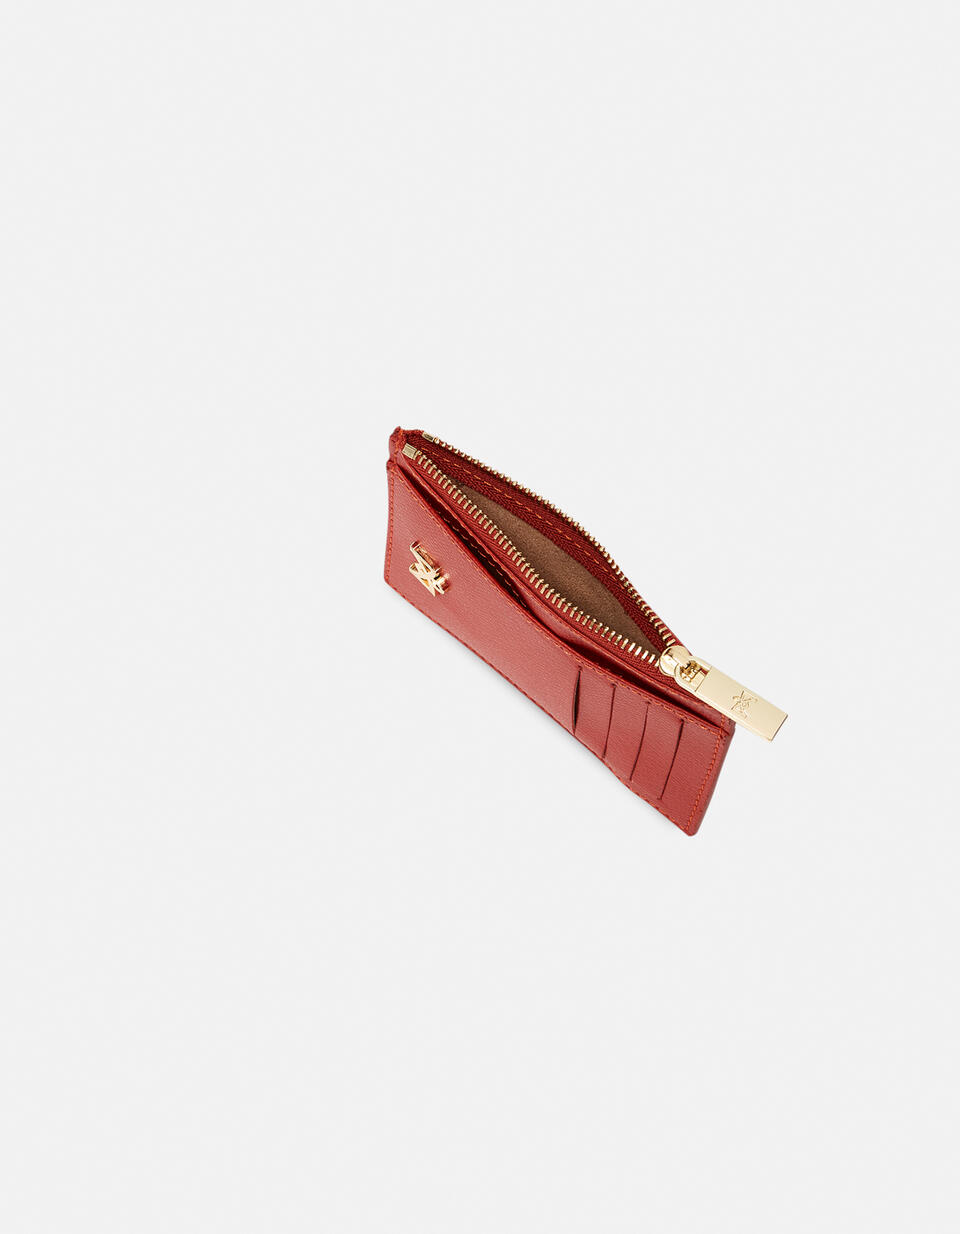 Card holder with zip - Card Holders - Women's Wallets | Wallets ARANCIO BRUCIATO - Card Holders - Women's Wallets | WalletsCuoieria Fiorentina